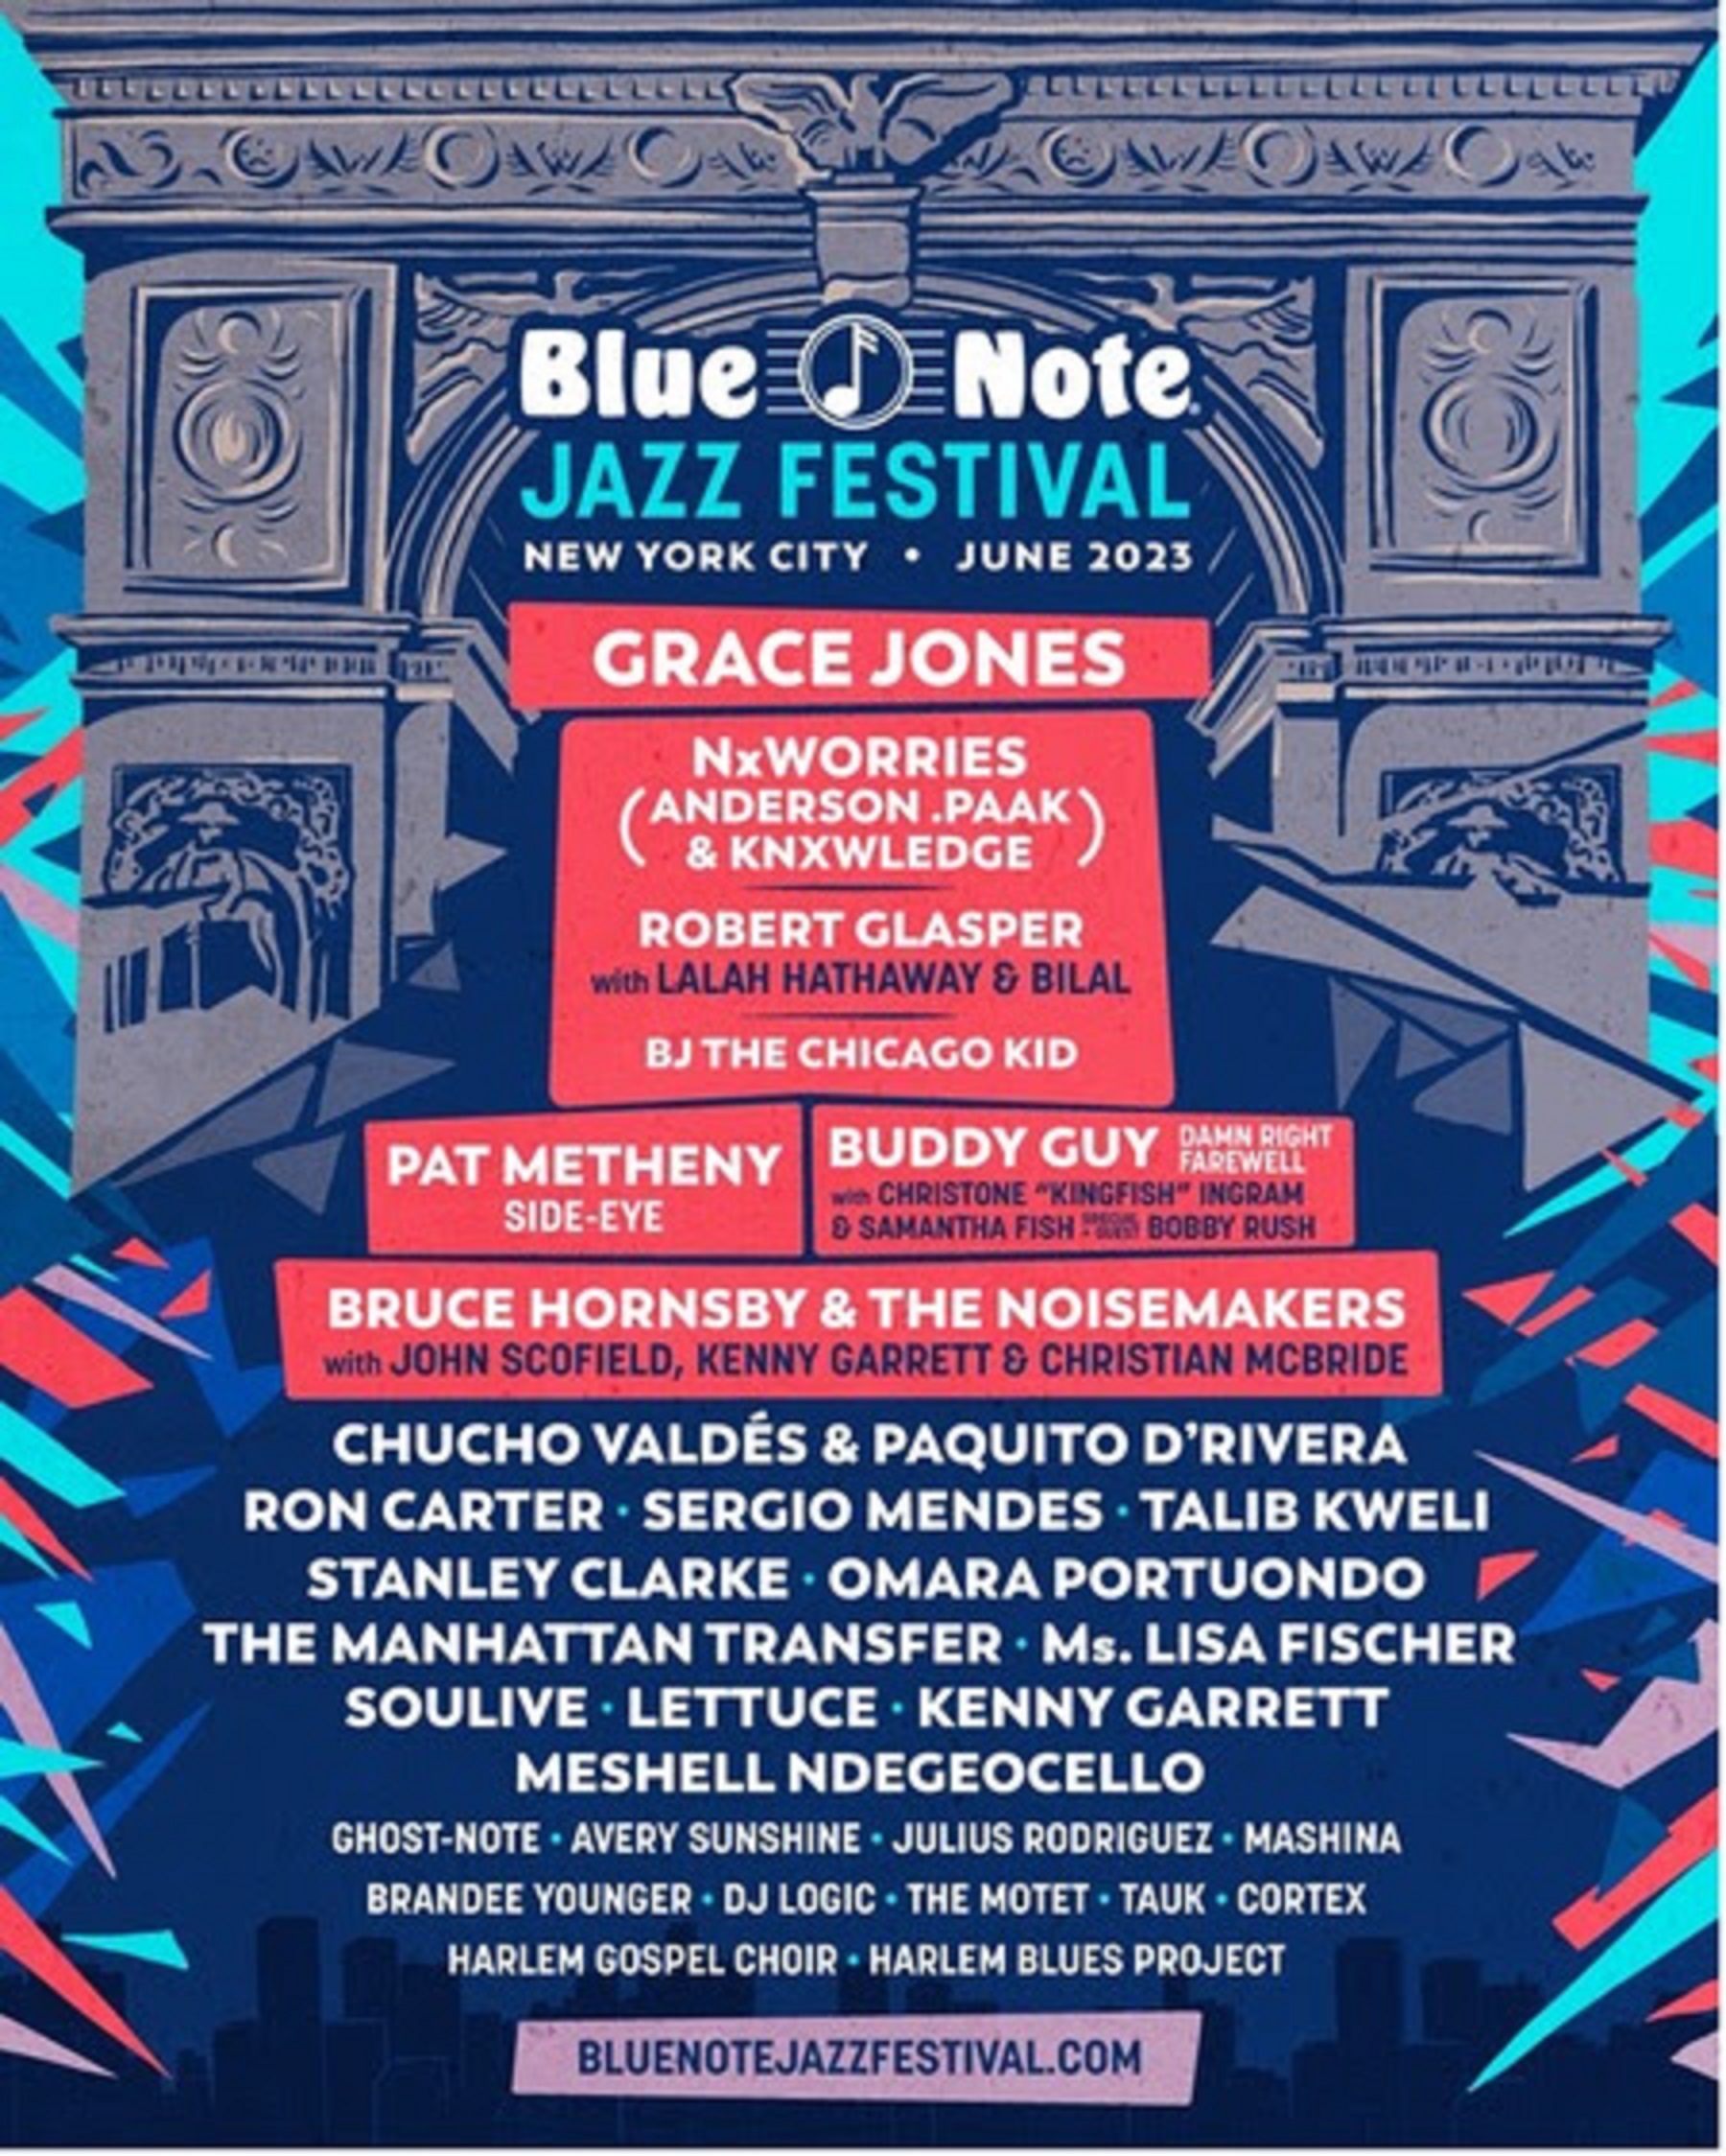 Blue Note Jazz Festival confirms NYC lineup featuring Grace Jones, Robert Glasper, BJ The Chicago Kid, Buddy Guy, Pat Metheny, NxWorries and more